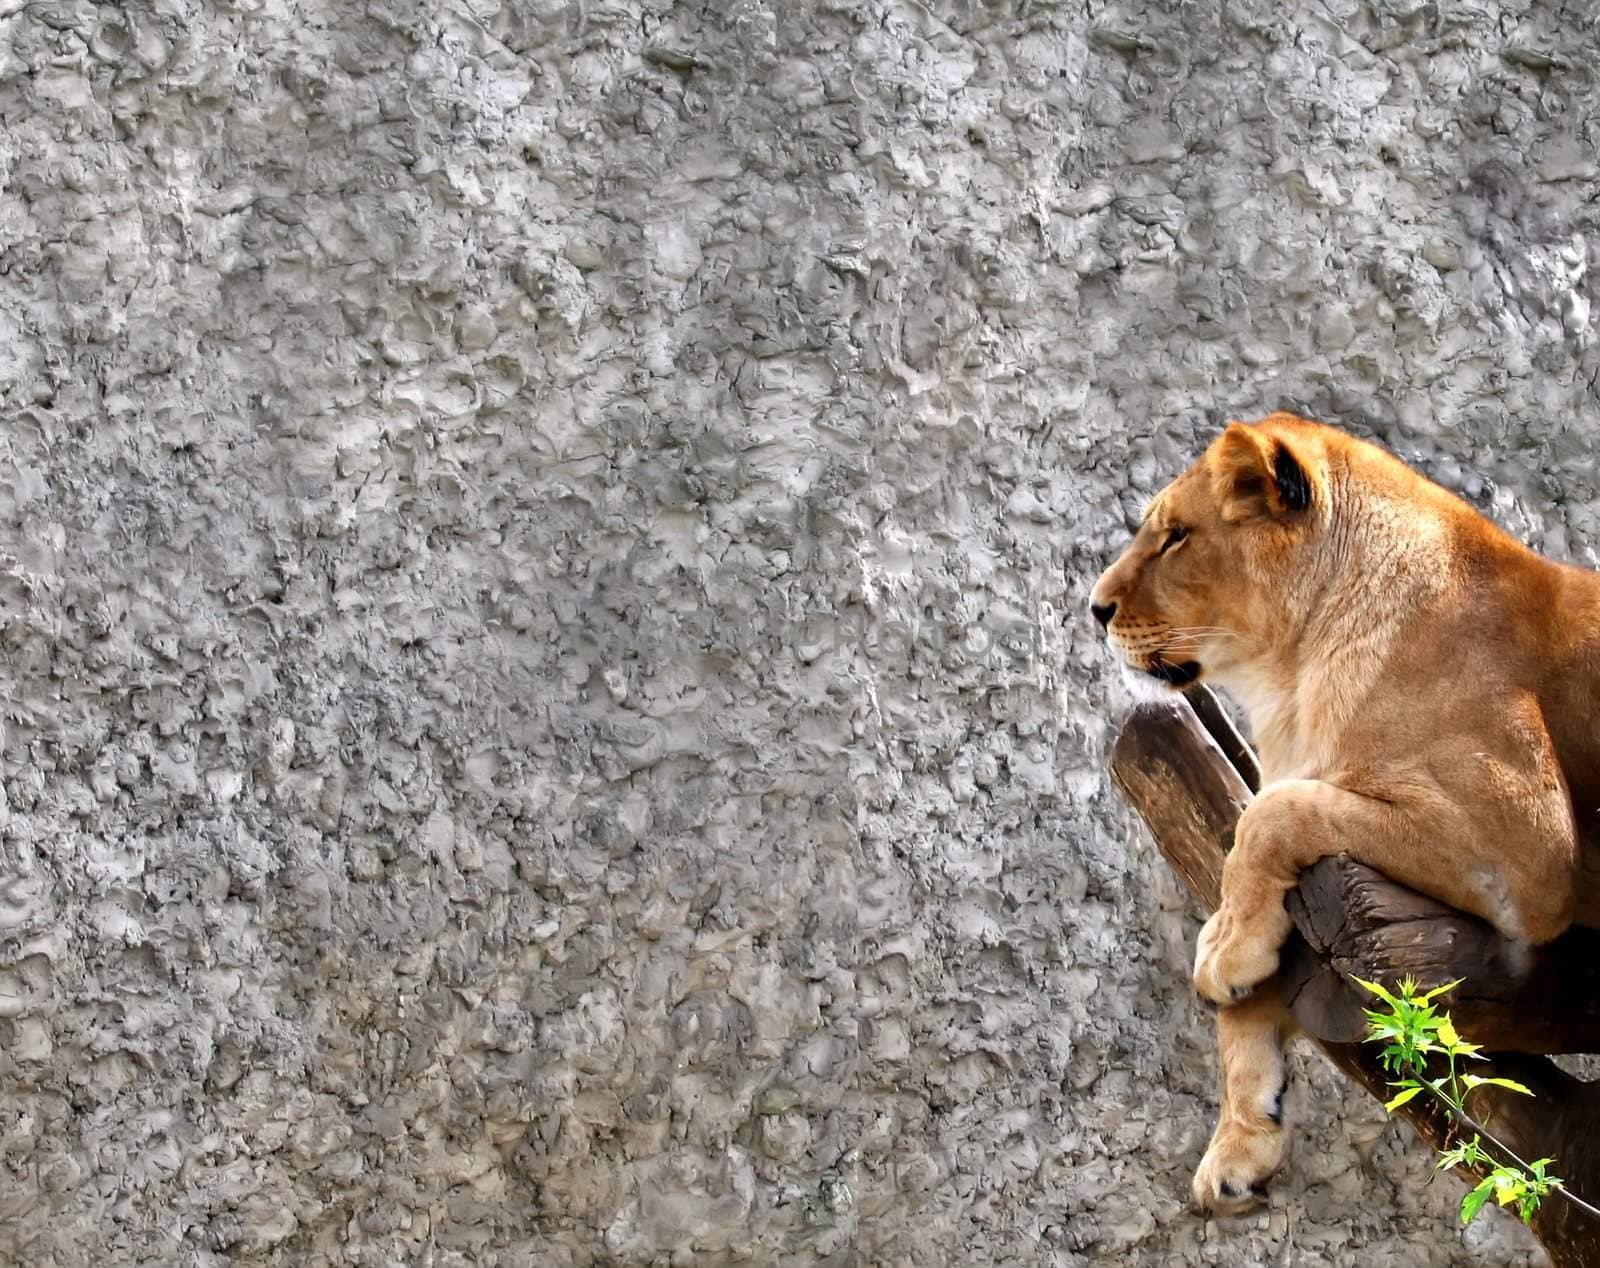 The picture of resting lioness is done in a zoo